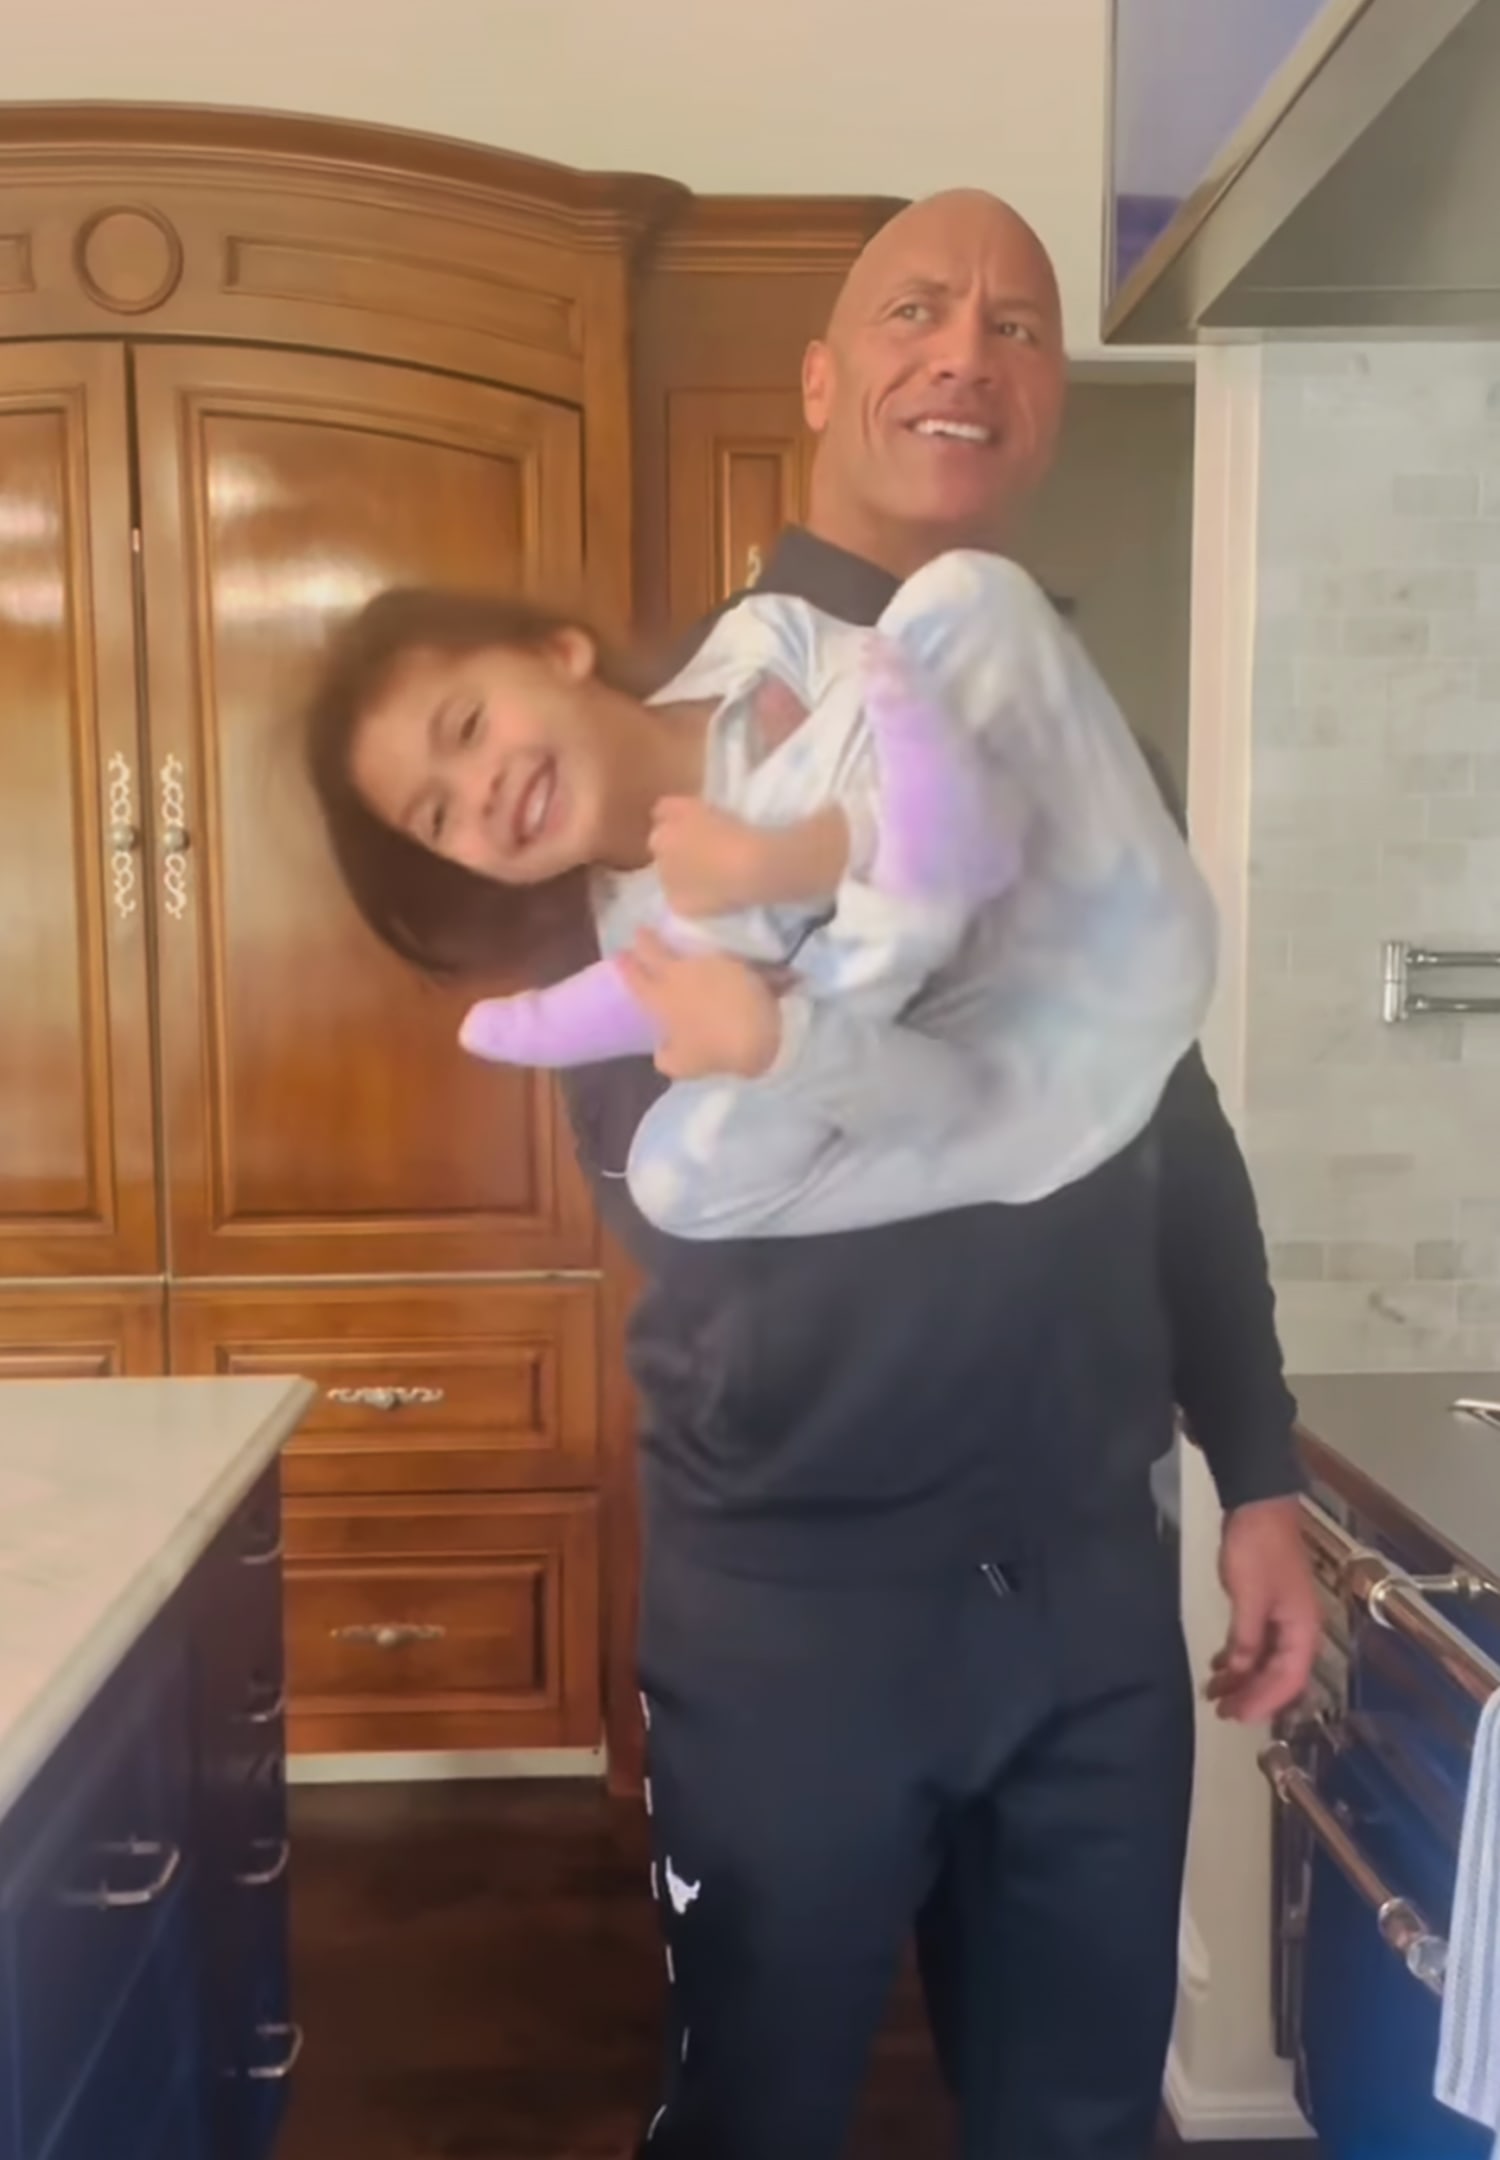 Rep Sleeping Daughter Videos - Dwayne Johnson's Workout Includes 'Daddy Curls' With His Daughter In New  Video